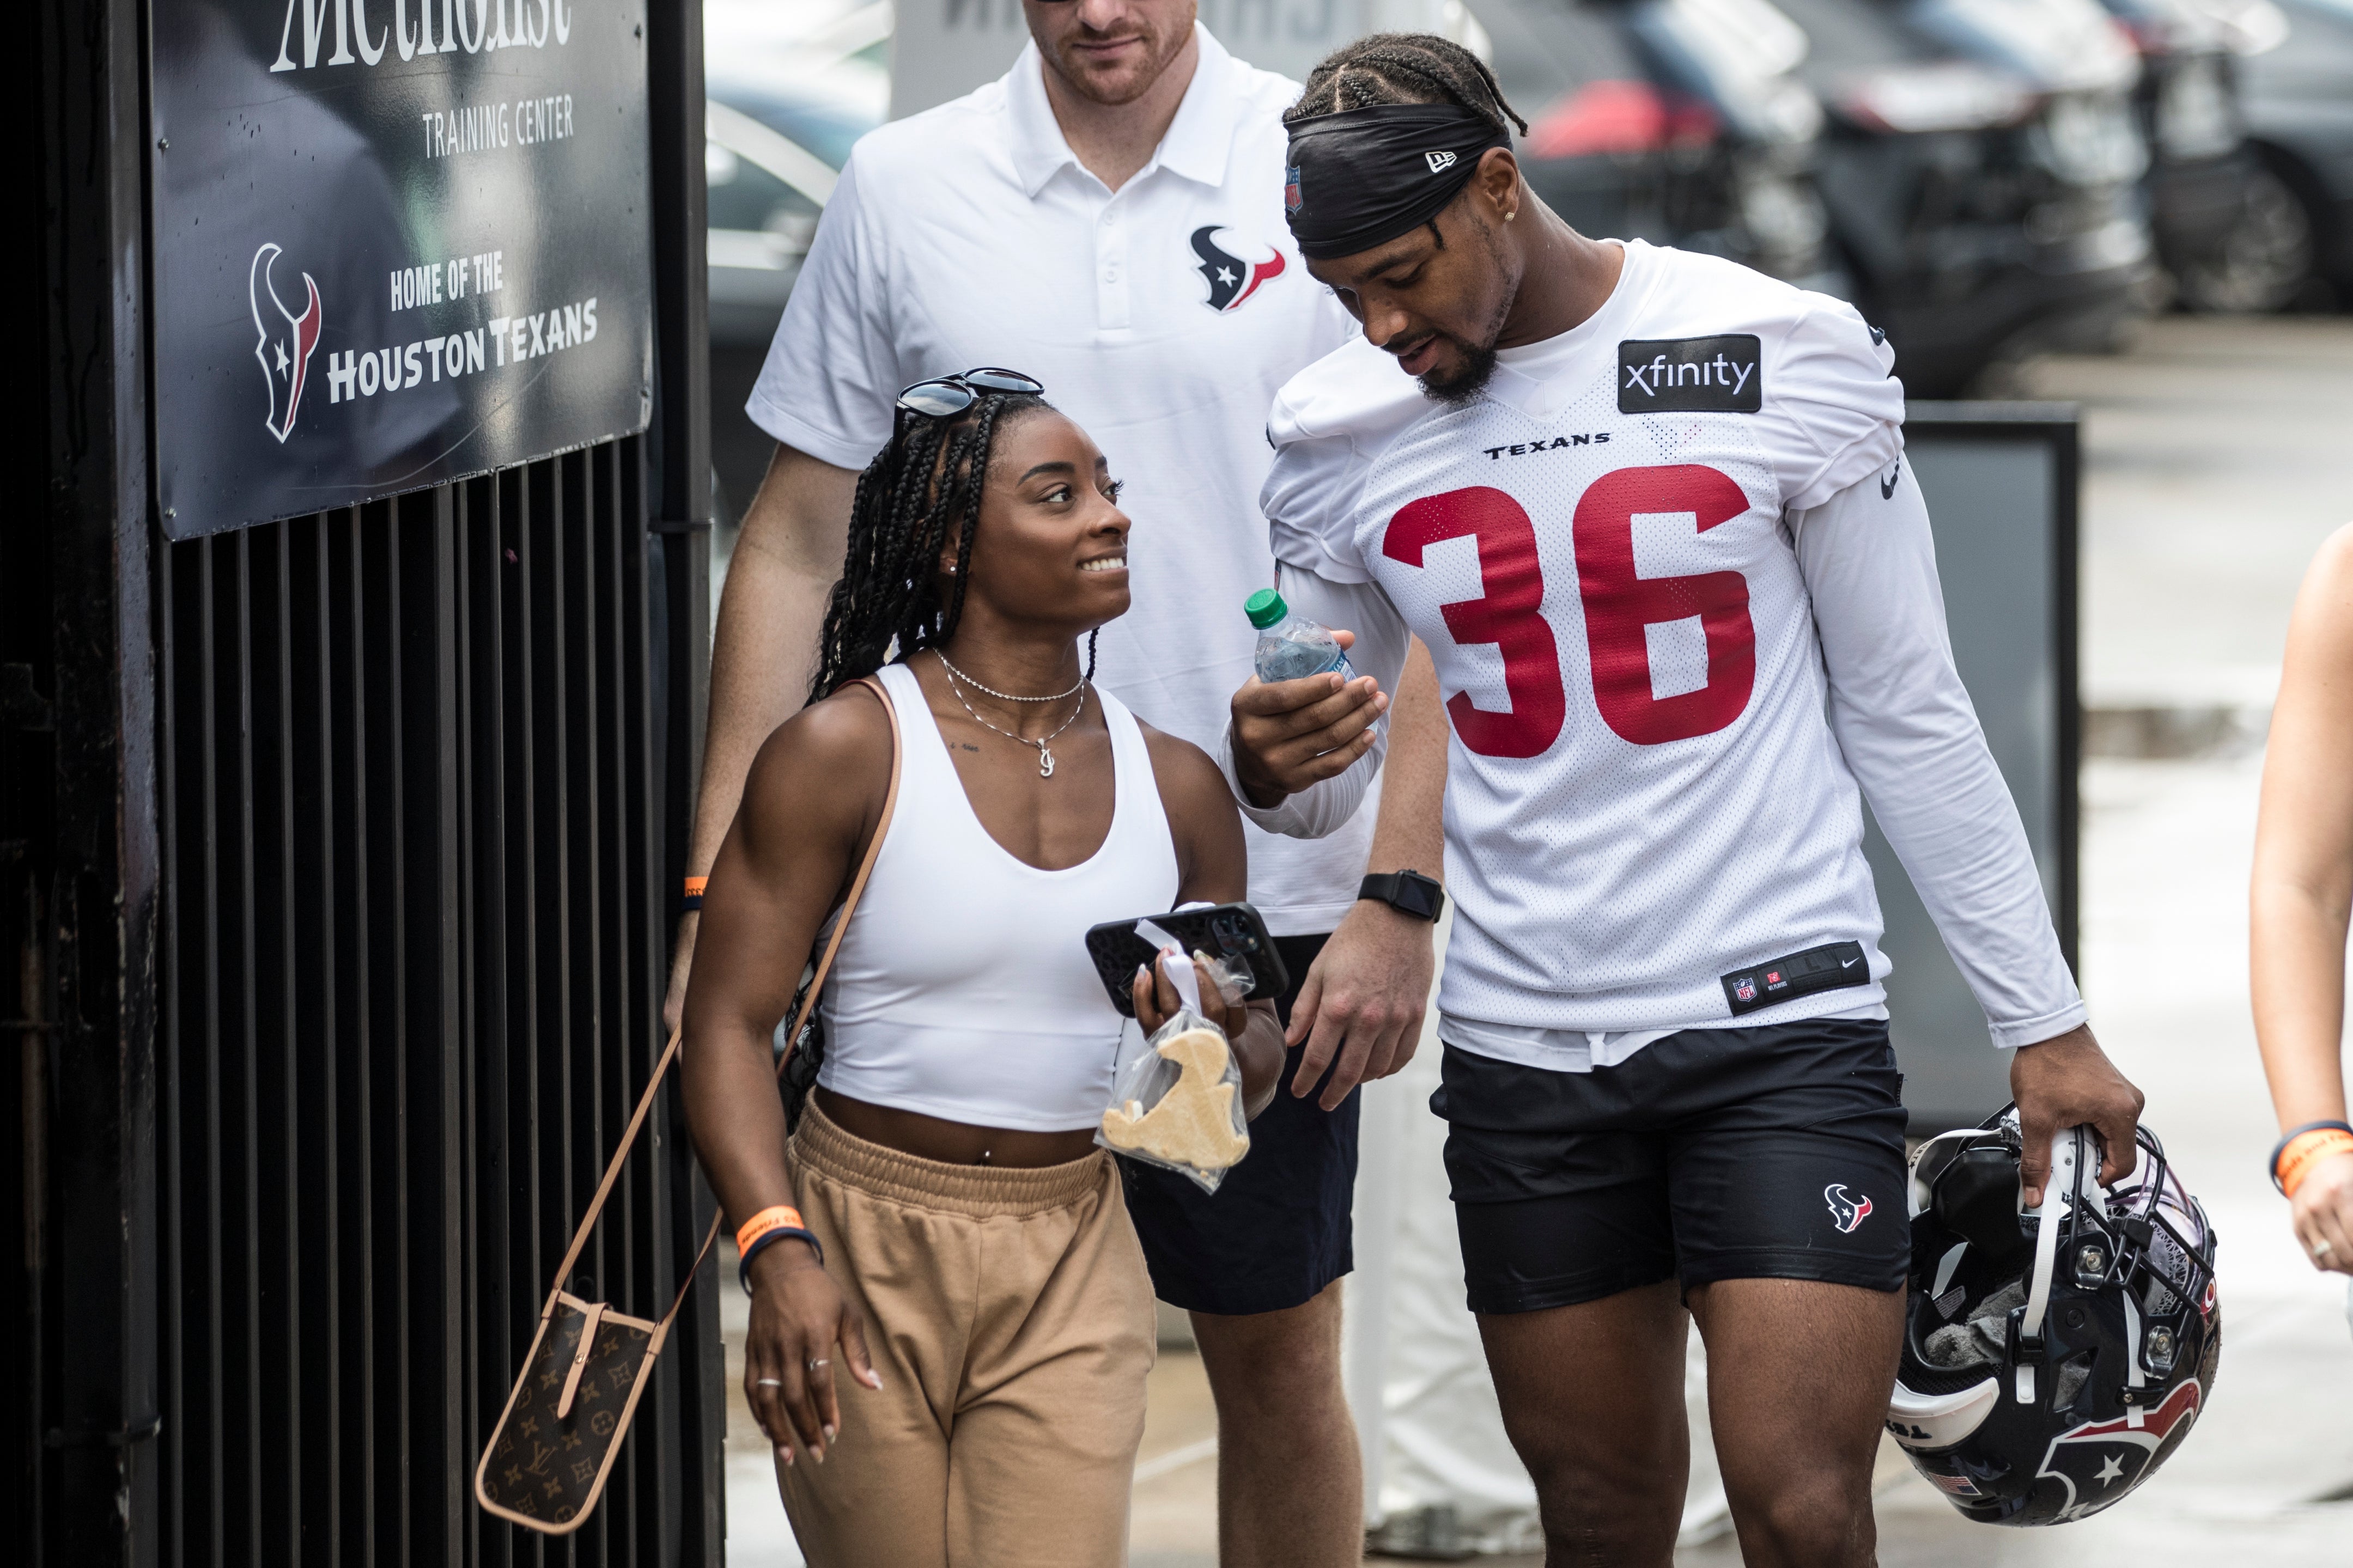 Olympic gymnast Simone Biles walks with her boyfriend Houston Texans defensive back Jonathan Owens (36) after the Texans’ practice at NFL football training camp, Friday, 6 August, 2021, in Houston.